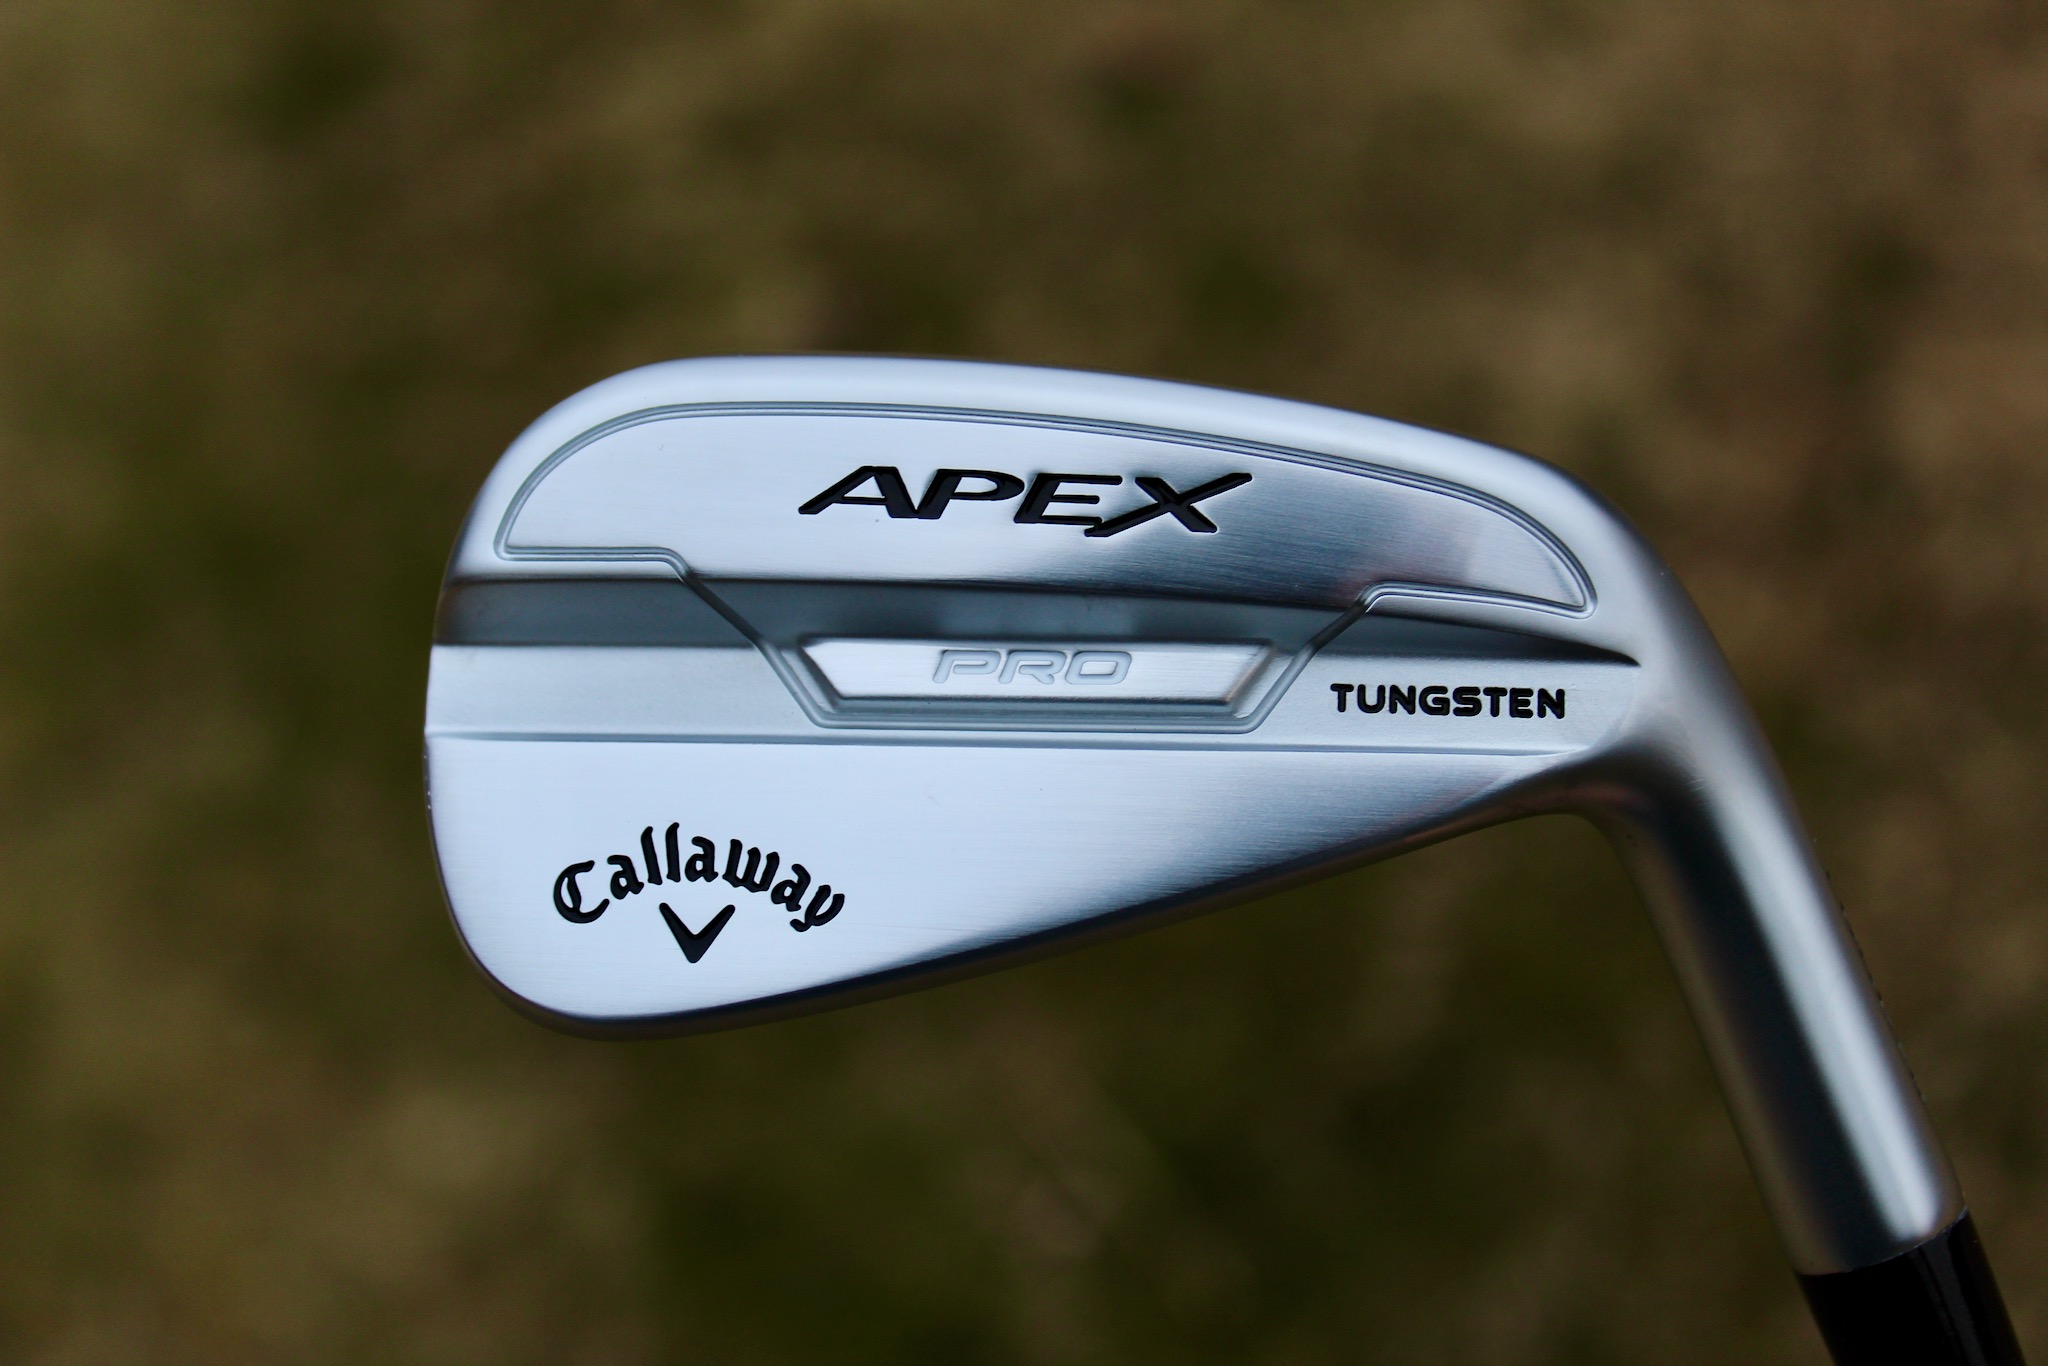 New Callaway 21 Apex Apex Pro And Apex Dcb Irons Could This Be The Best Apex Launch Ever Golfwrx